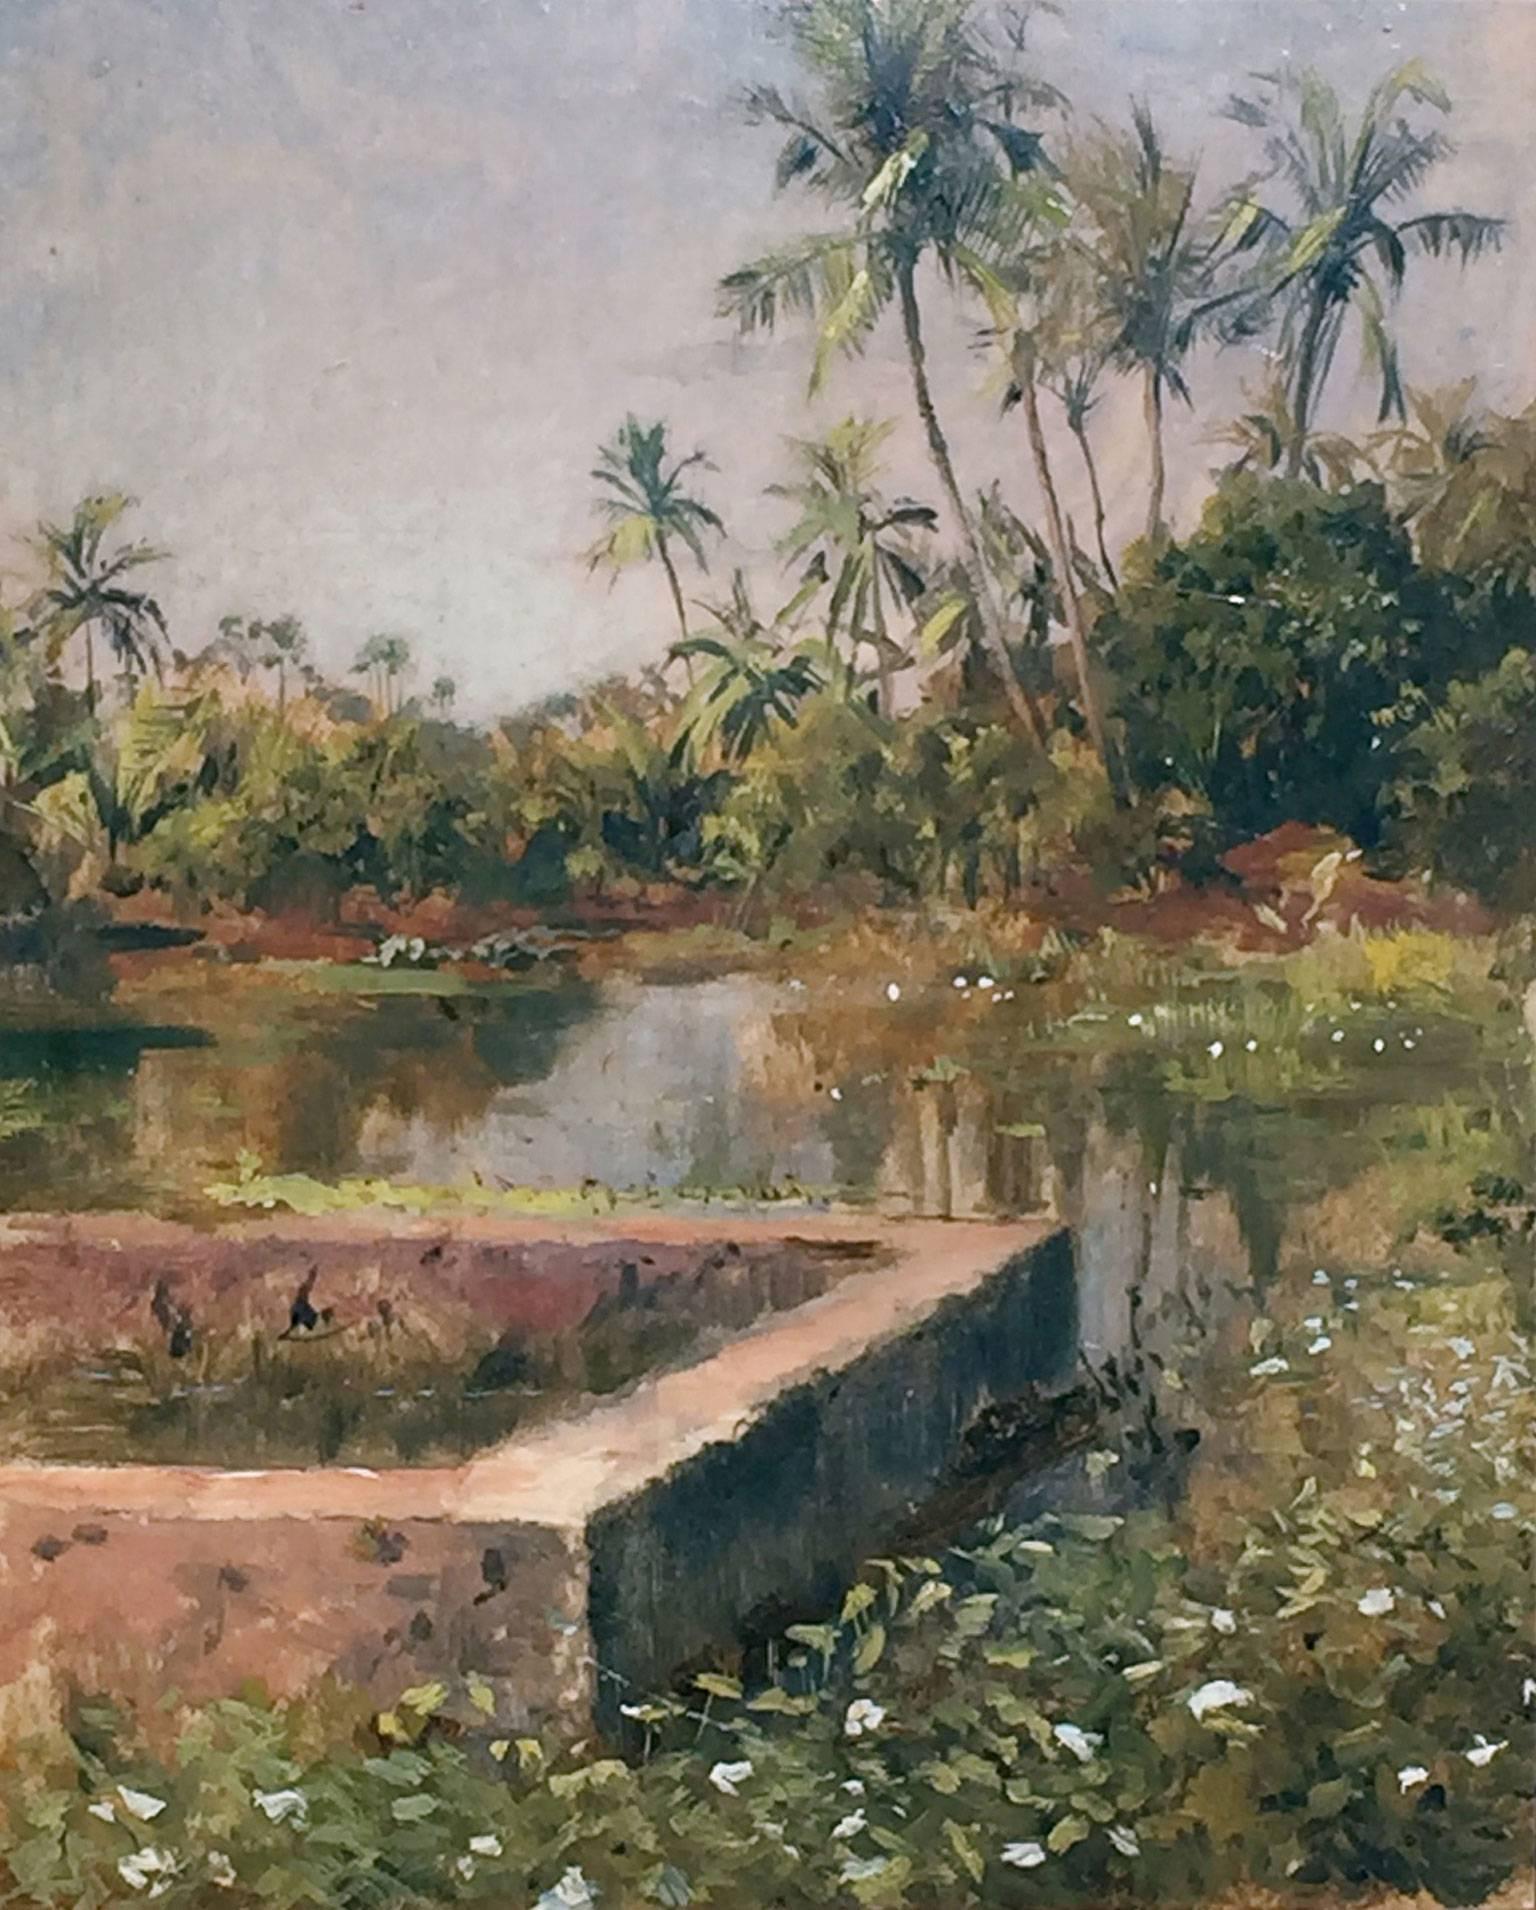 EDWIN LORD WEEKS
American, 1849–1903

Sacred Lake, Bombay

Oil on board
10½ x 8¾ inches (26.6 x 22.3 cm)
Framed: 16½ x 14½ inches (42.6 x 36.8 cm)

Painted circa 1885, this work was probably painted during Weeks' third visit to Bombay. It will be